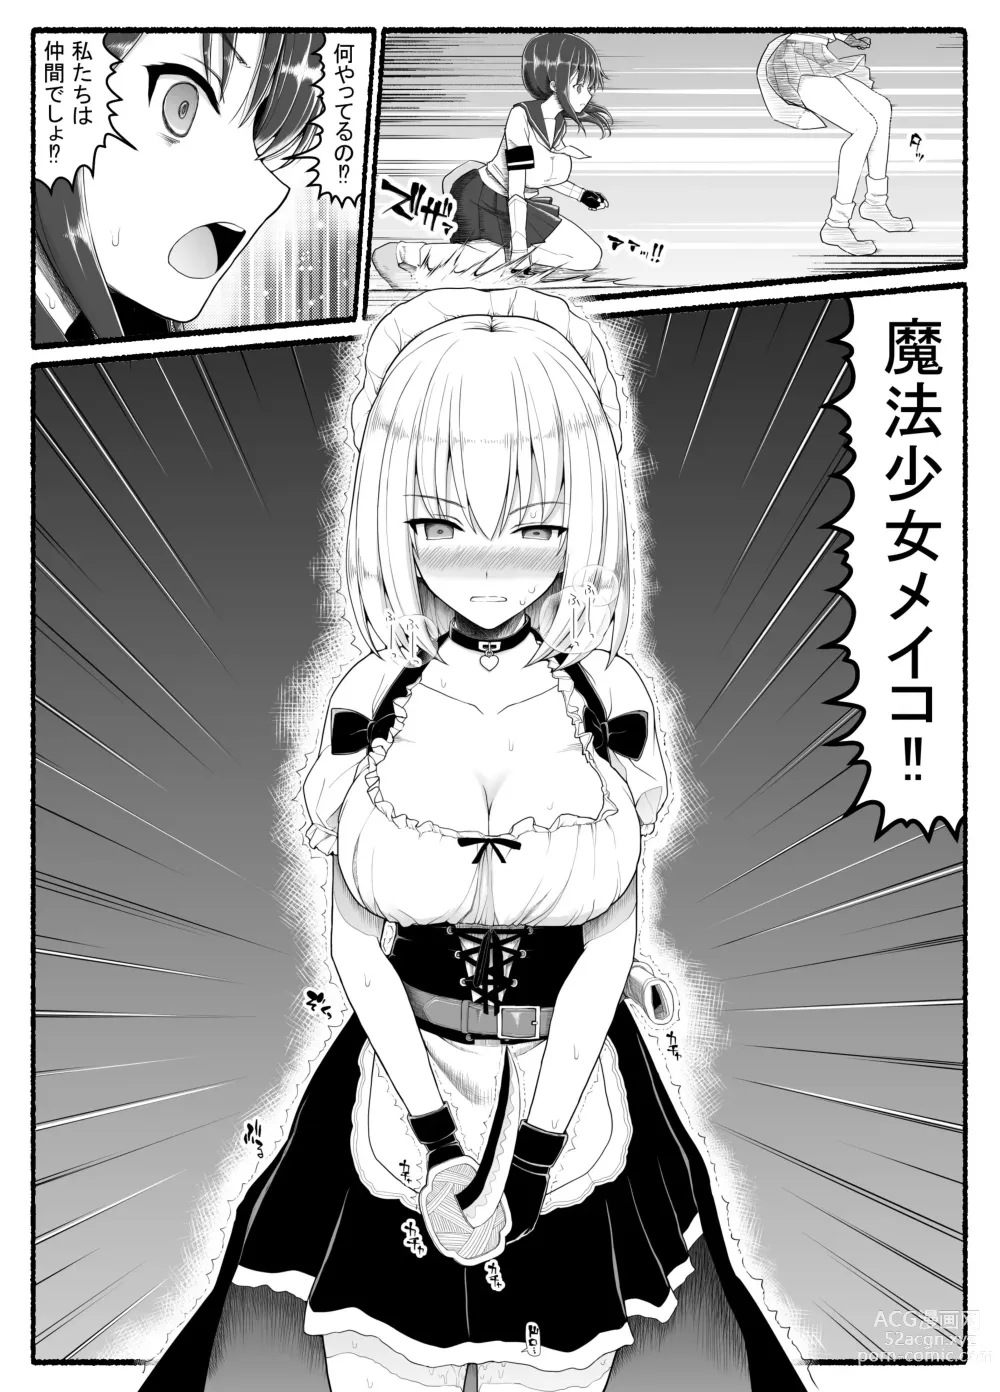 Page 6 of doujinshi Magical Girl vs. Evil Creature 22